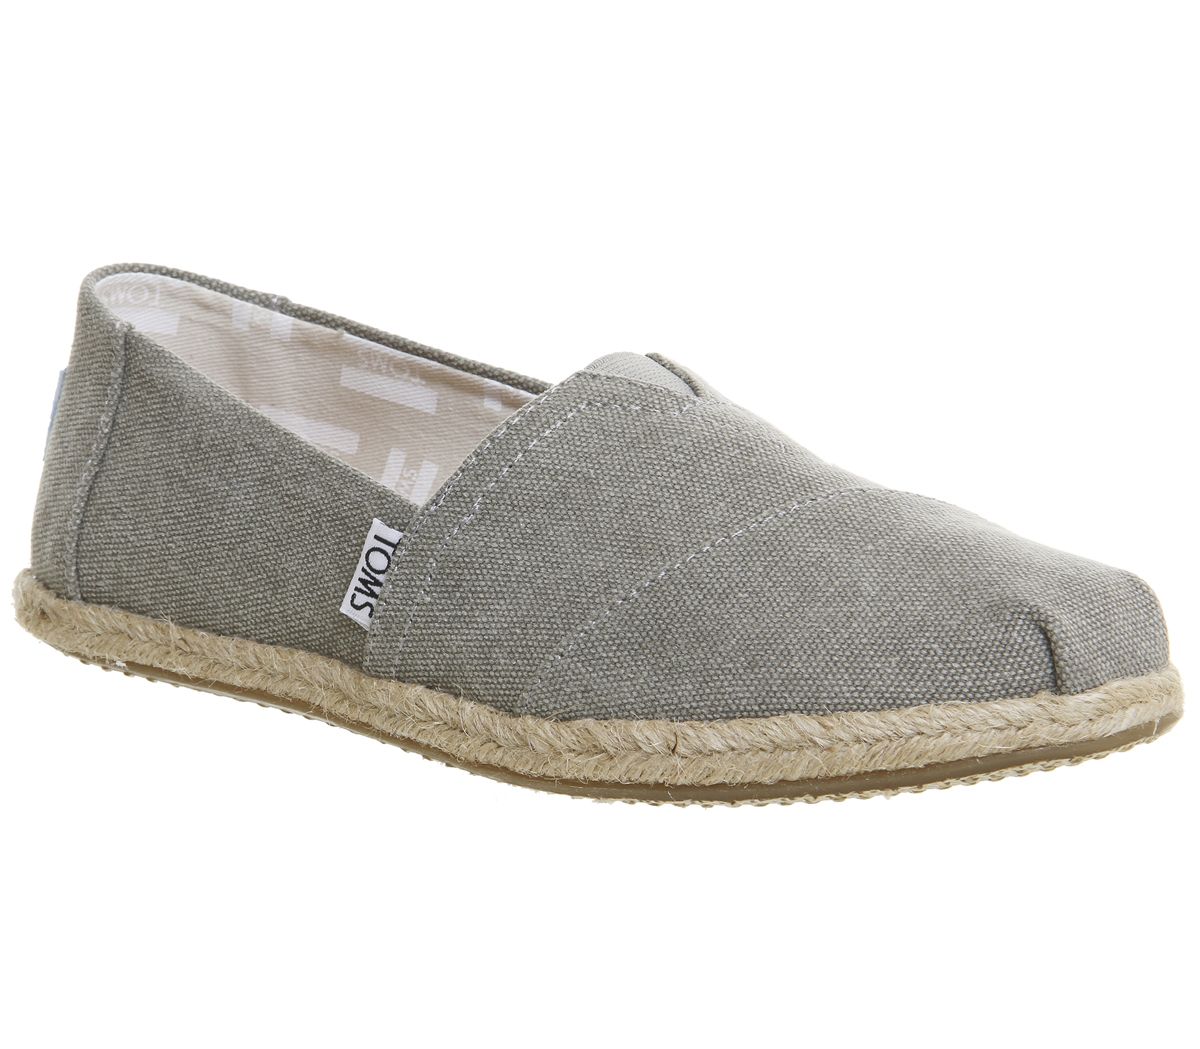 Toms Seasonal Classic Slip On Drizzle Grey Suede Rope Sole - Flats